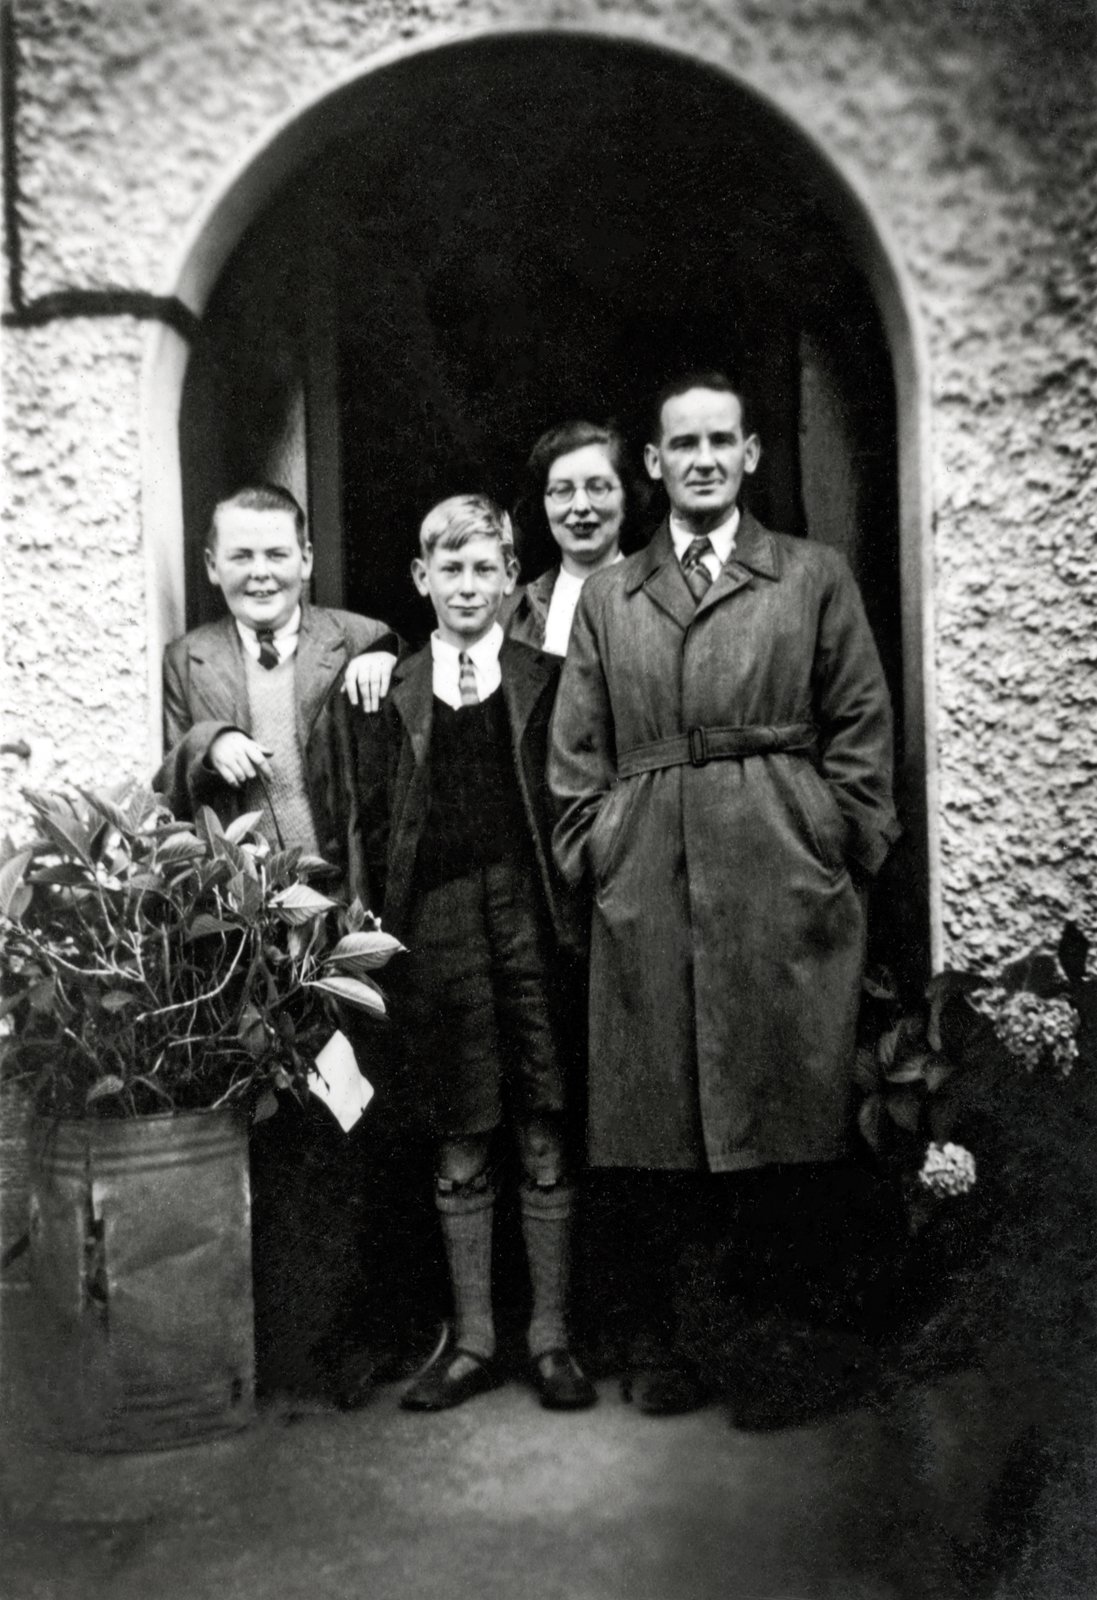 Superintendent George Lawlor and his family in Monasterevin, County Kildare.